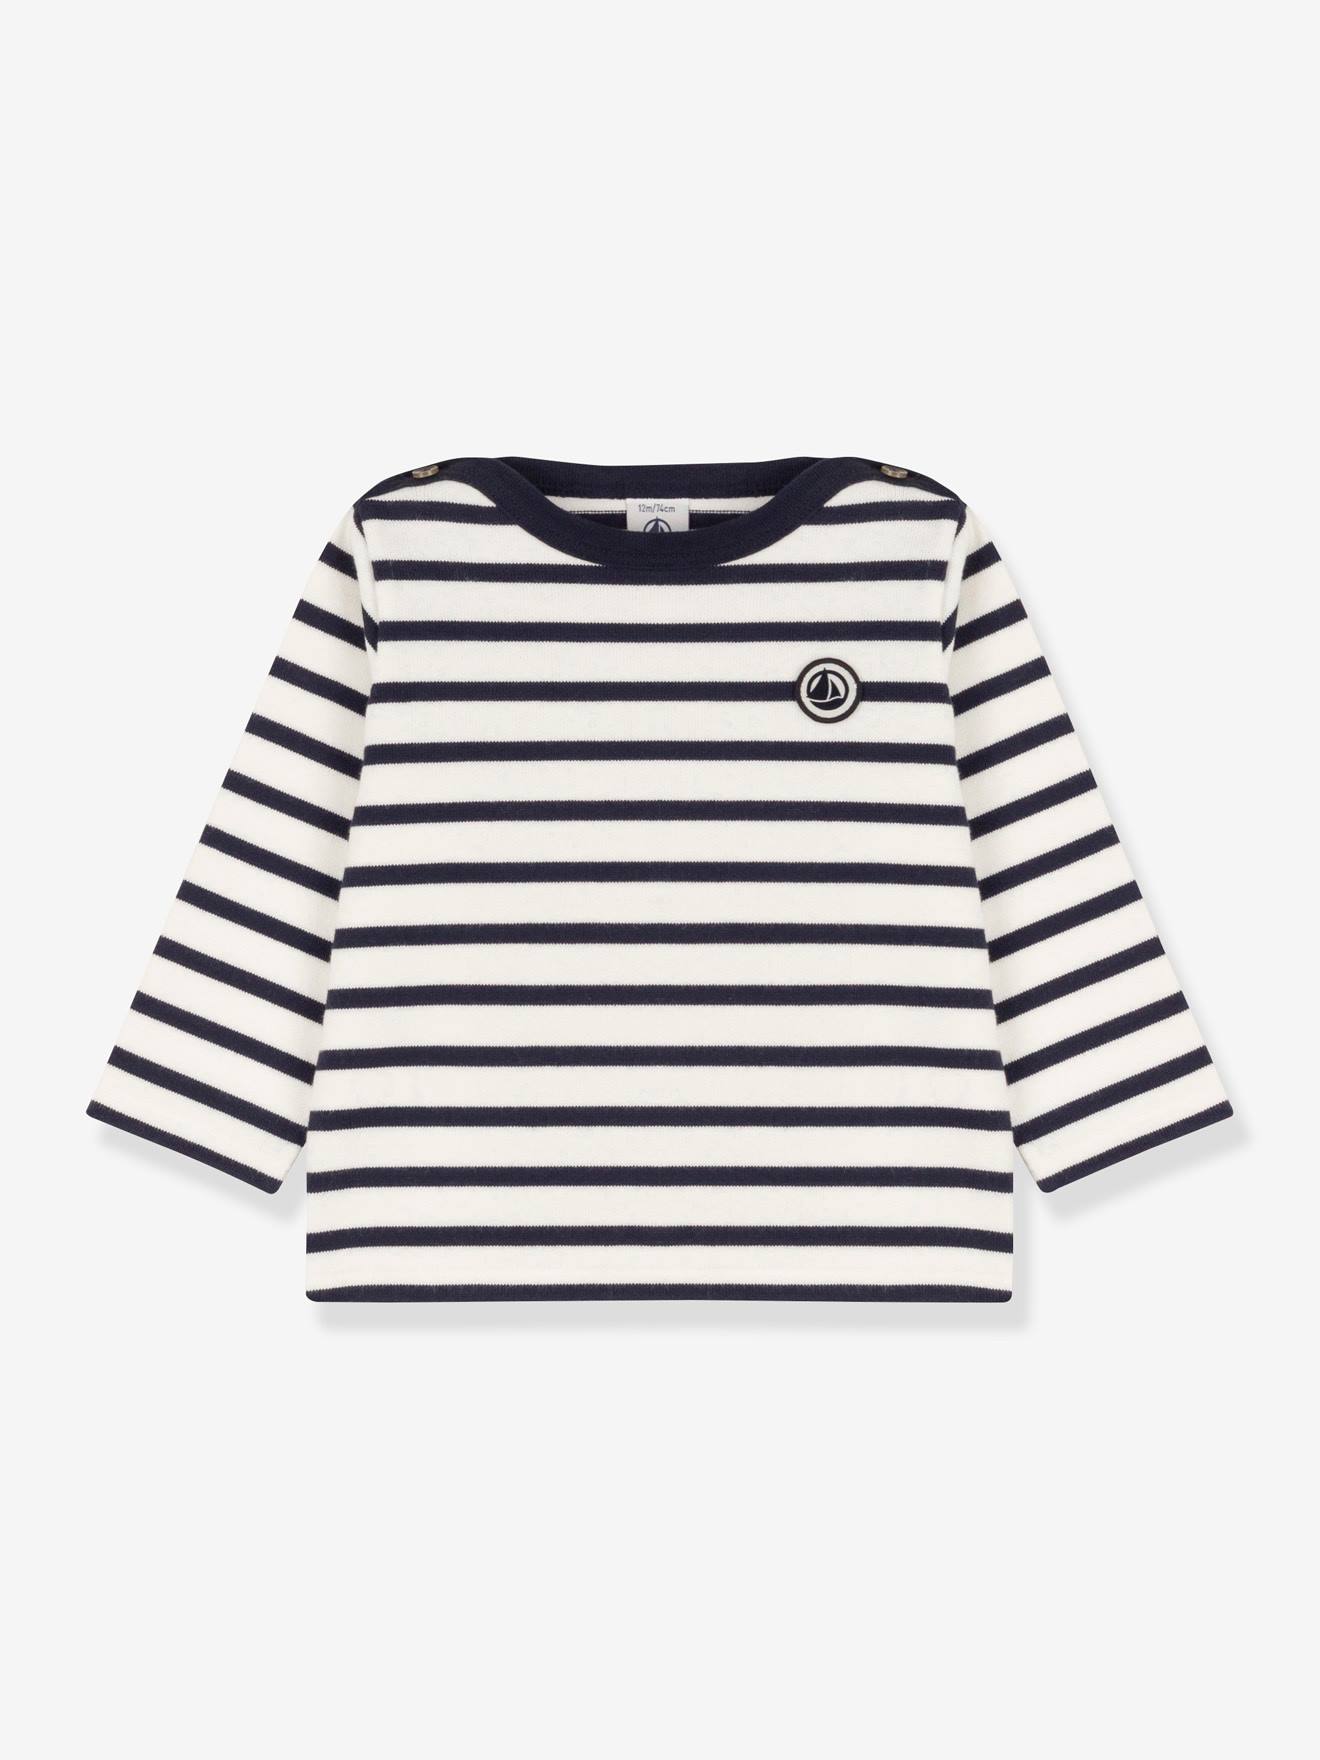 Long Sleeve Striped Jumper in Organic Cotton for Babies, by PETIT BATEAU white medium striped